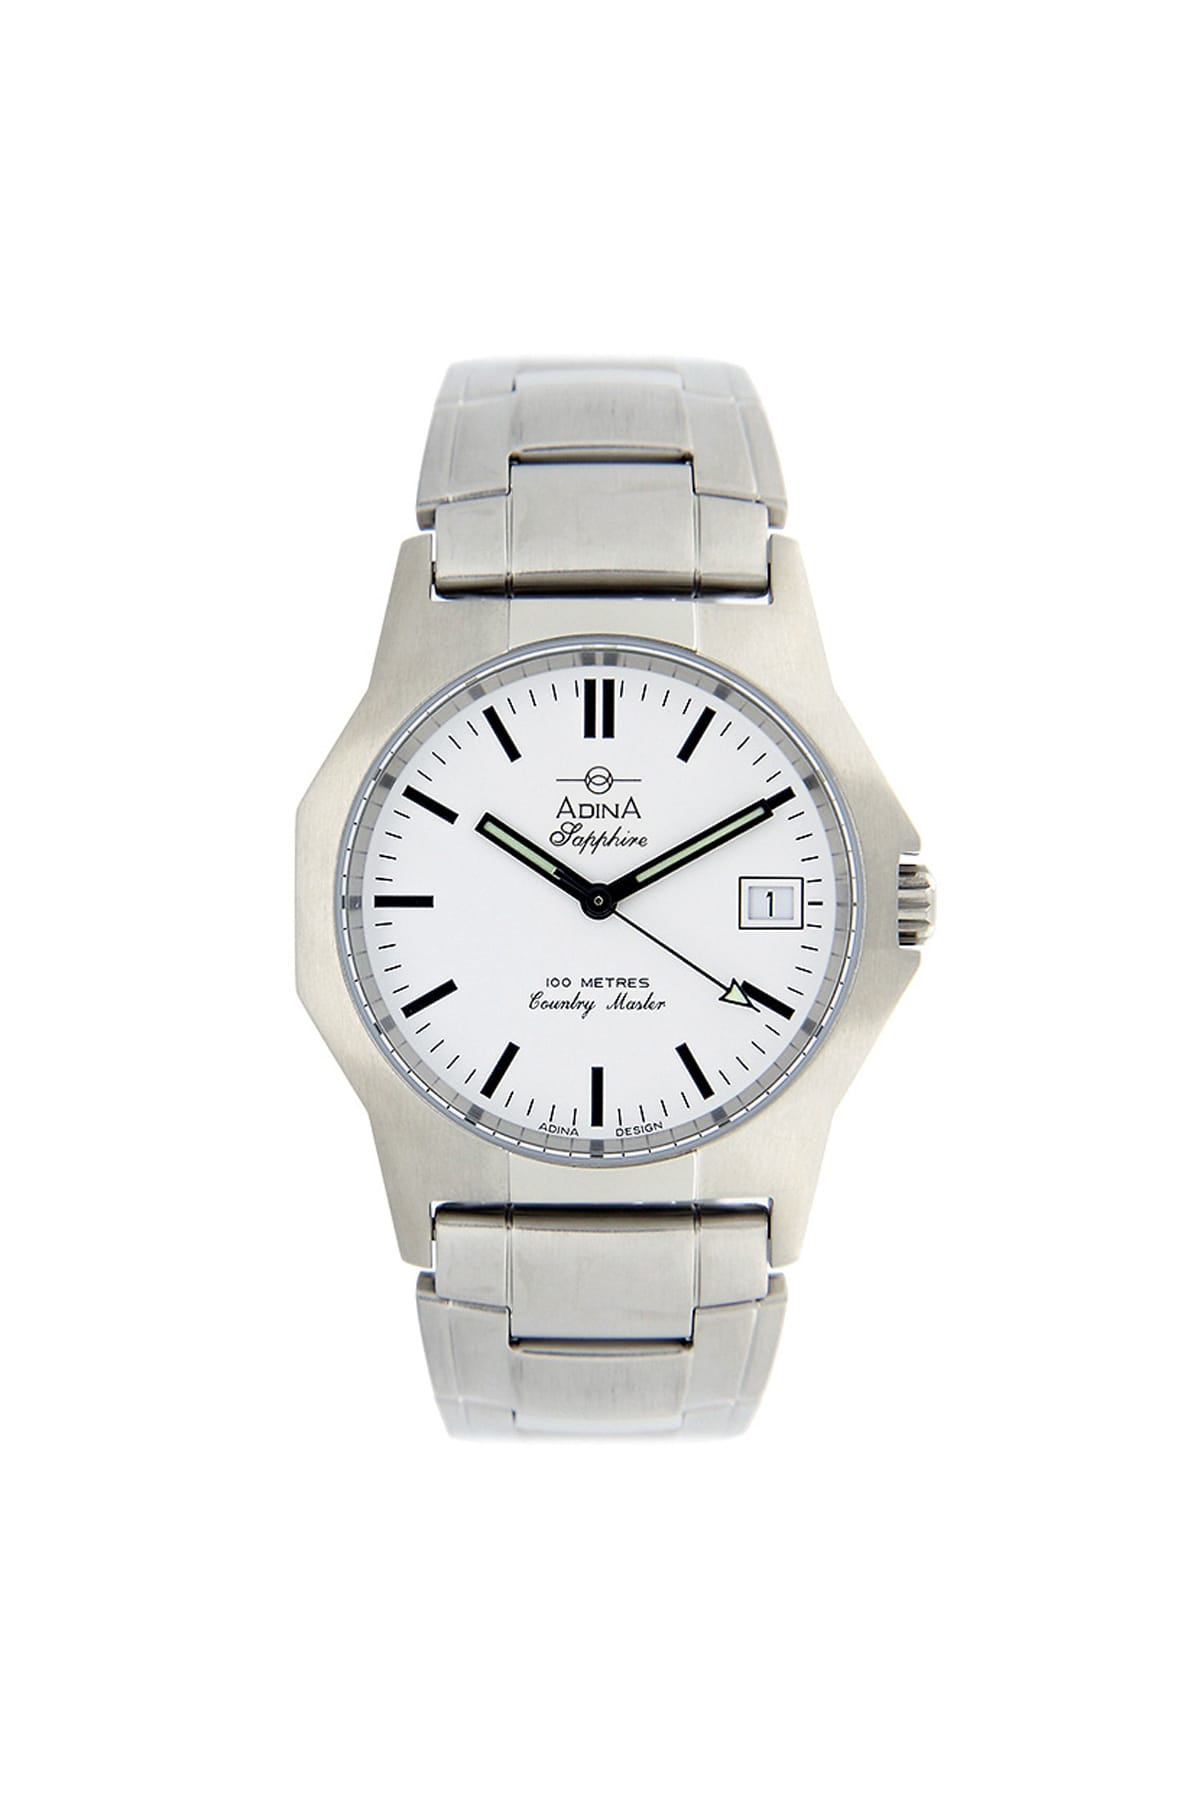 Adina Countrymaster Work Watch NK150 S1XB-SAP available from LeGassick.